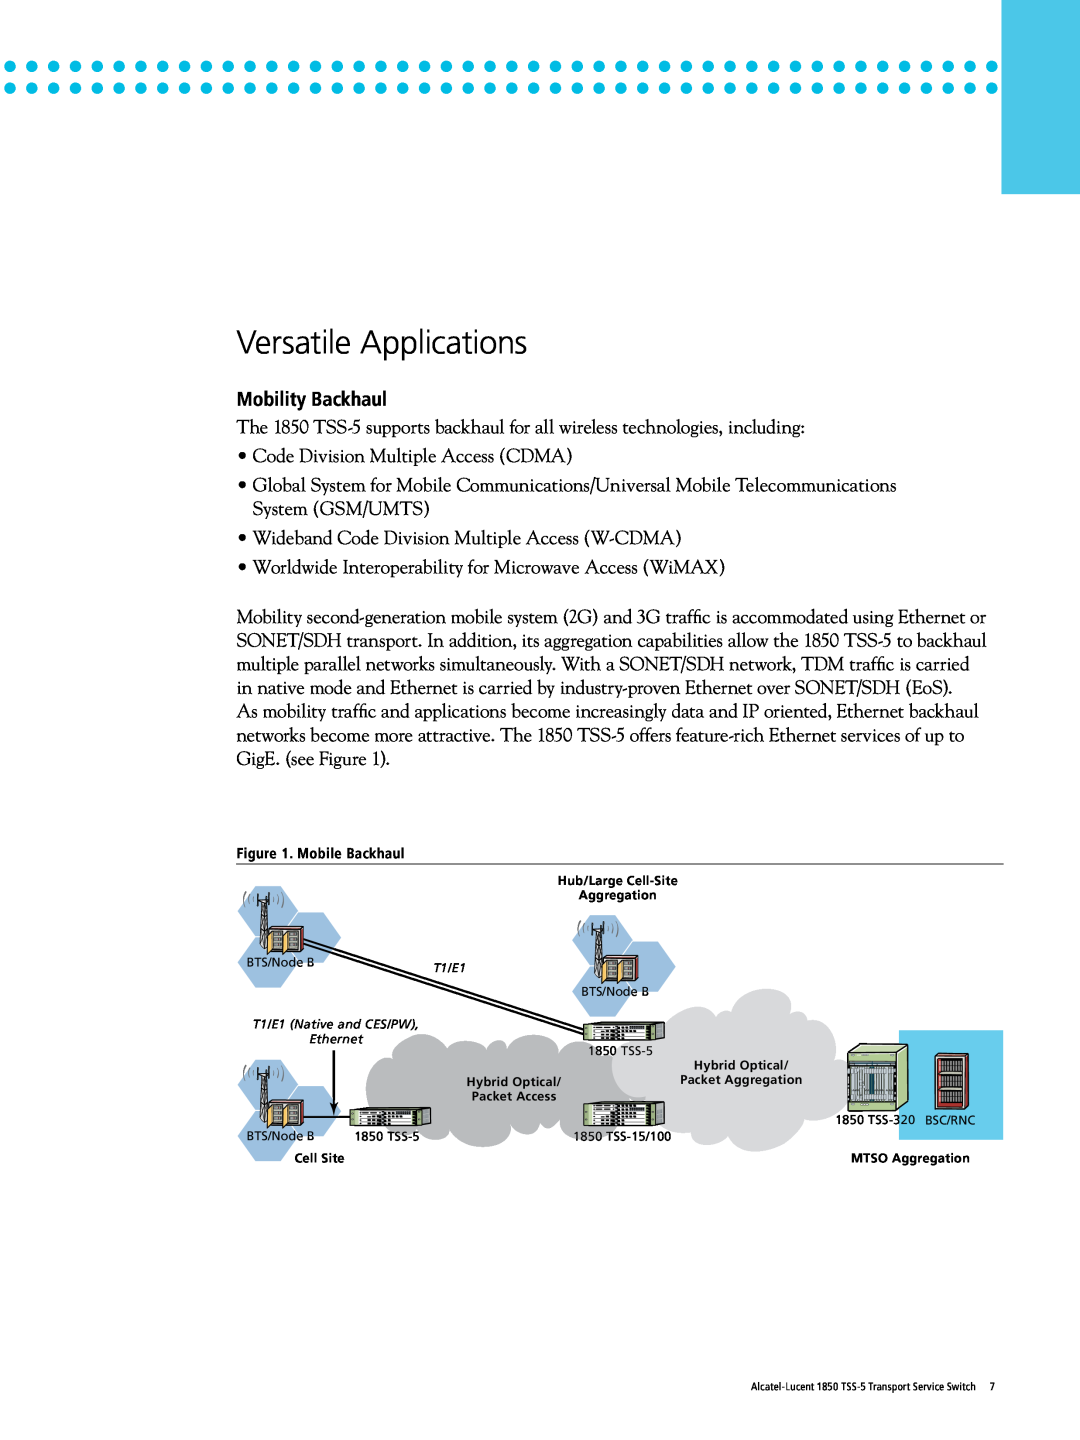 Alcatel Carrier Internetworking Solutions 1850 TSS-5 manual Versatile Applications, Mobility Backhaul 